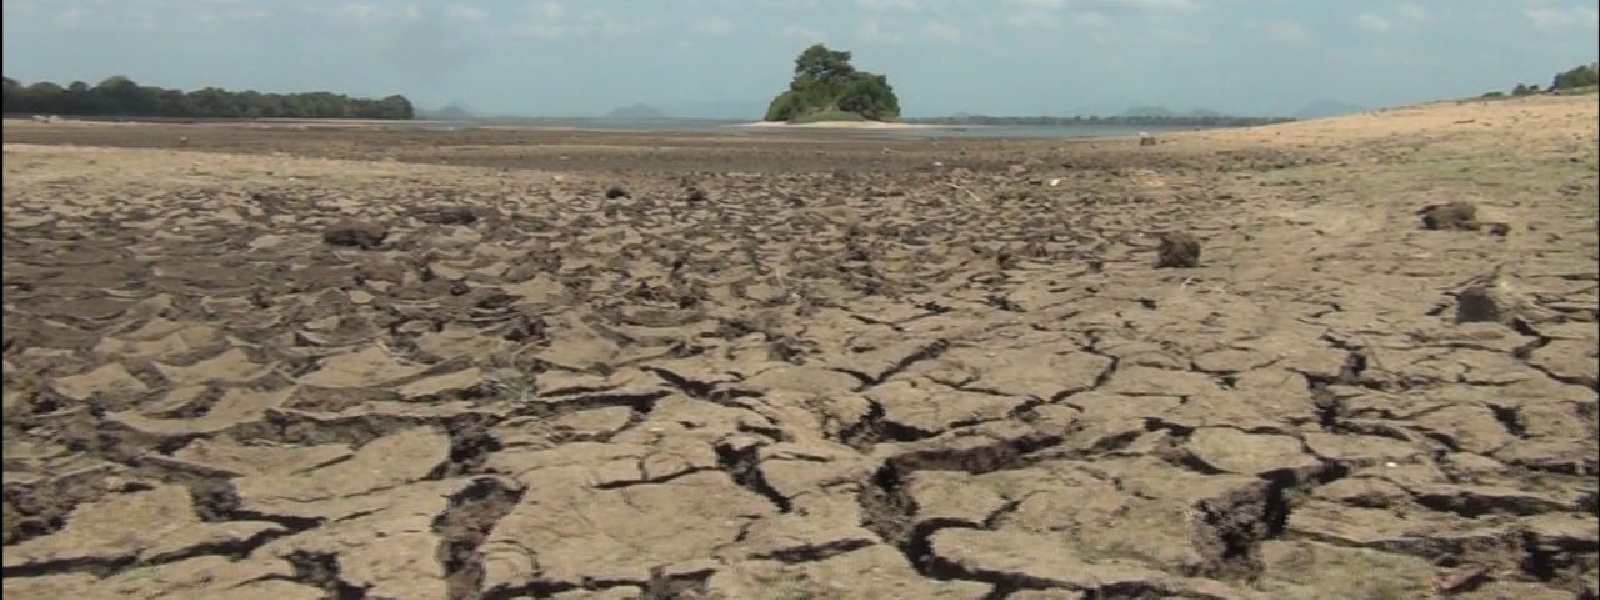 Over 150,000 people affected by dry weather